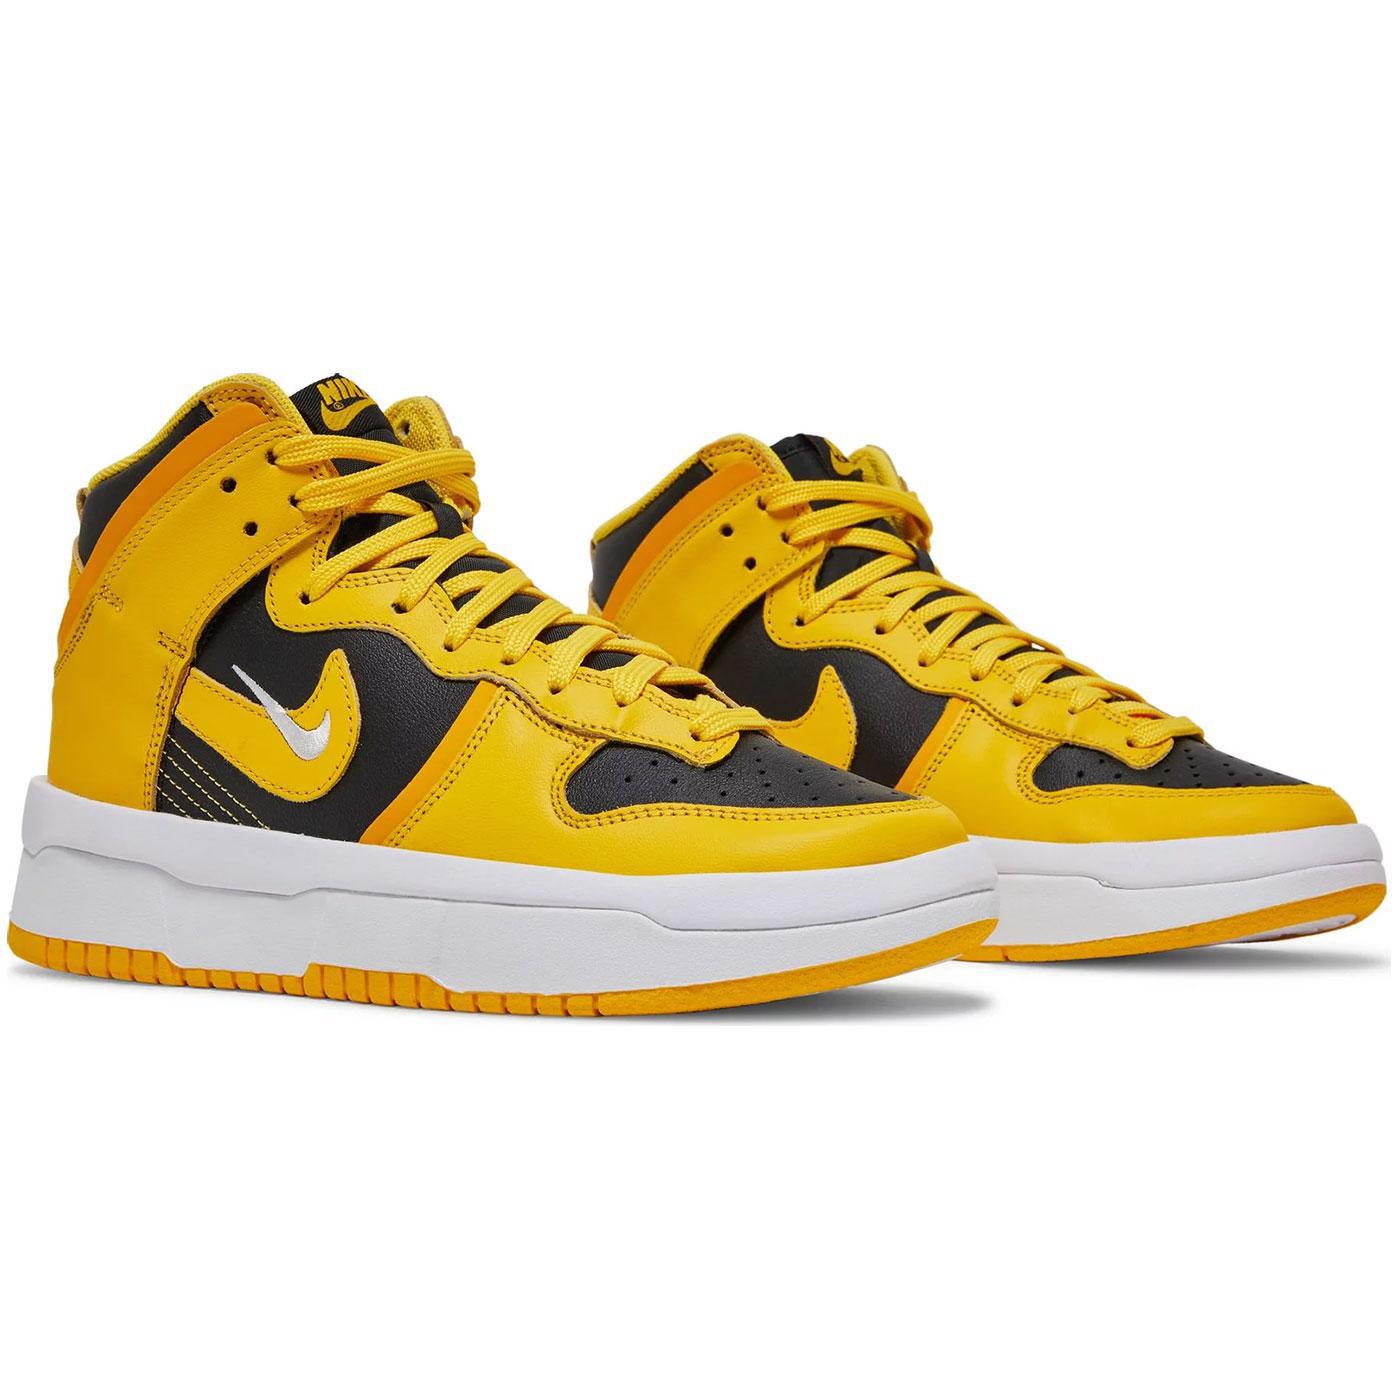 Wmns Dunk High Up 'Goldenrod' DH3718 001 New | USW